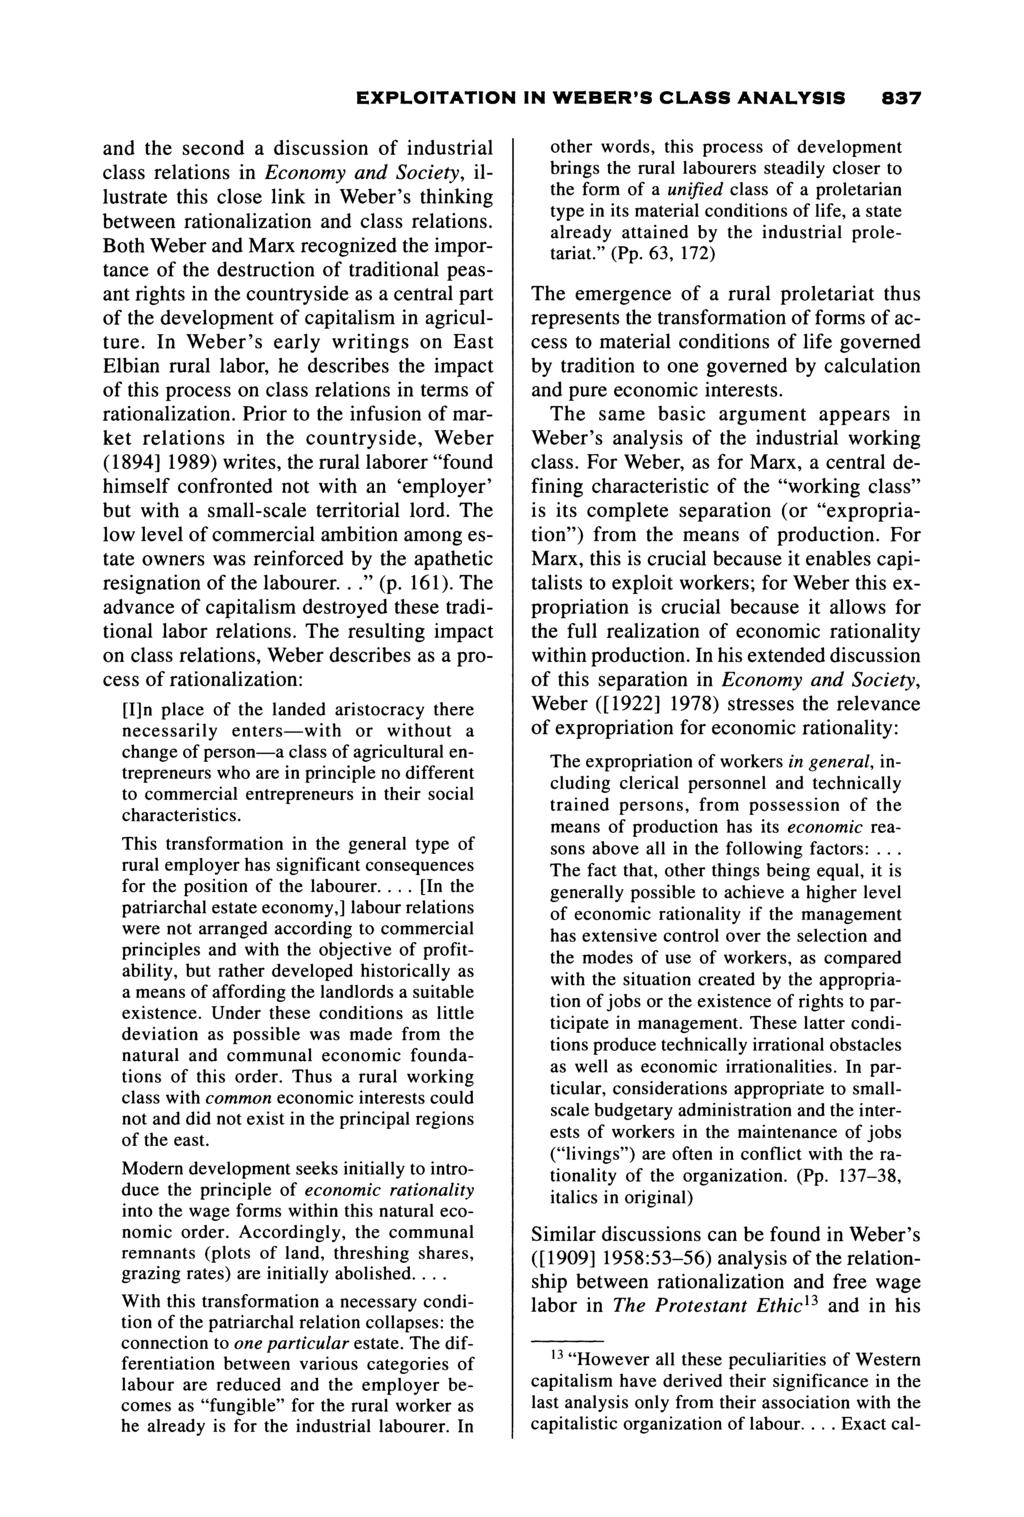 EXPLOITATION IN WEBER'S CLASS ANALYSIS 837 and the second a discussion of industrial class relations in Economy and Society, illustrate this close link in Weber's thinking between rationalization and